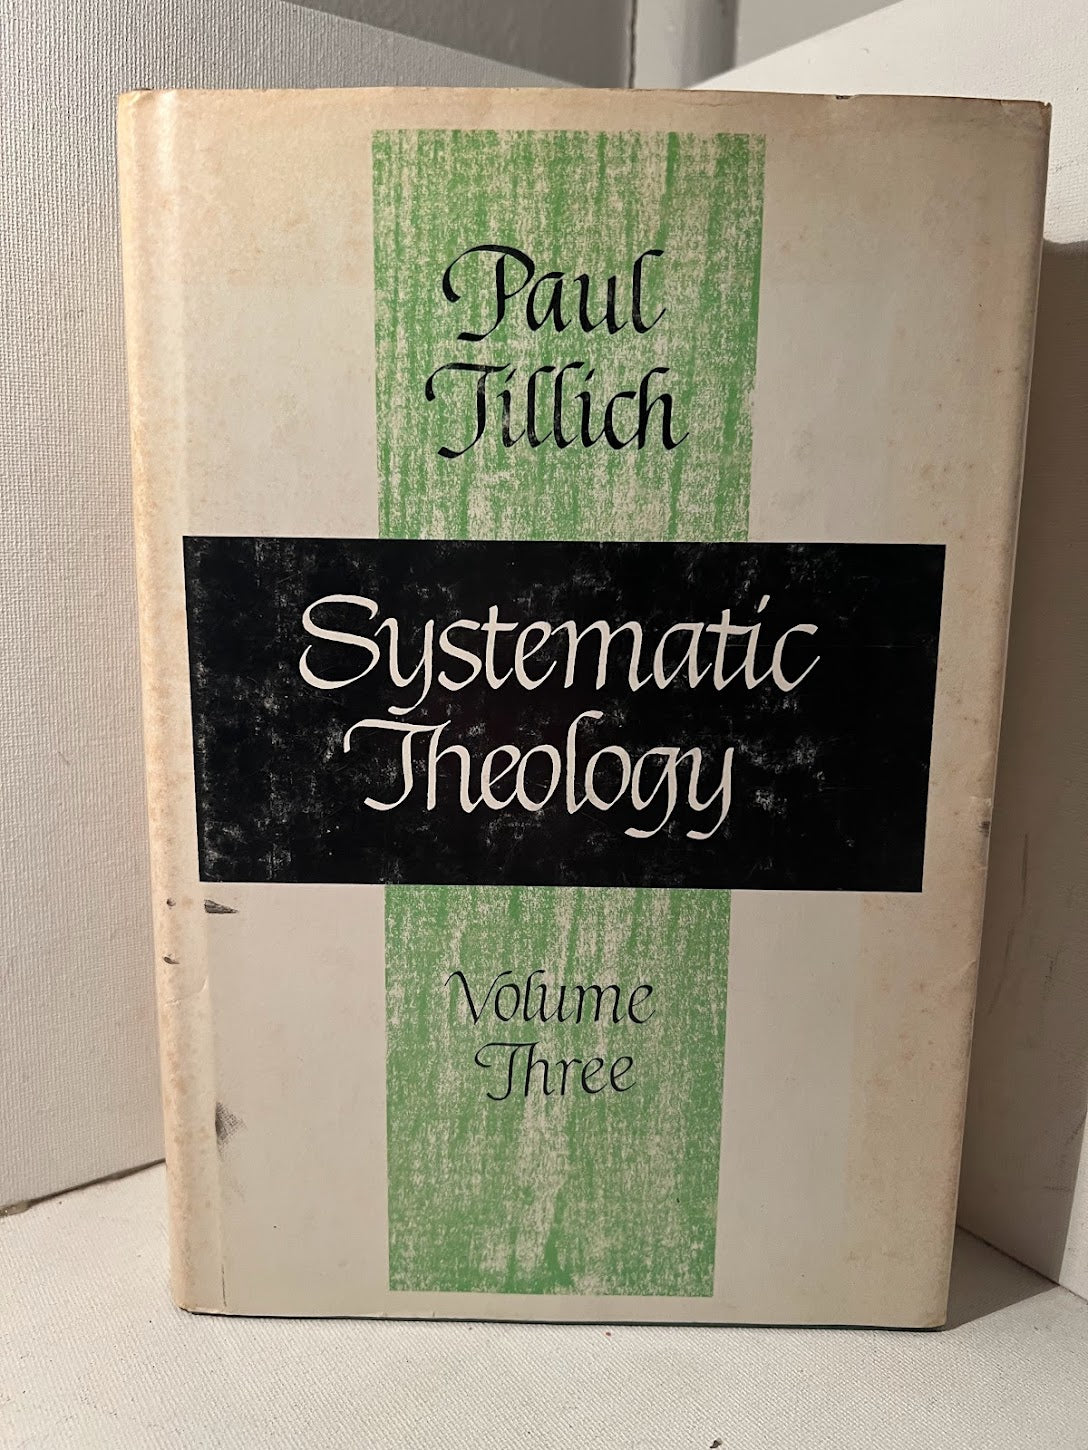 Systematic Theology by Paul Tillich